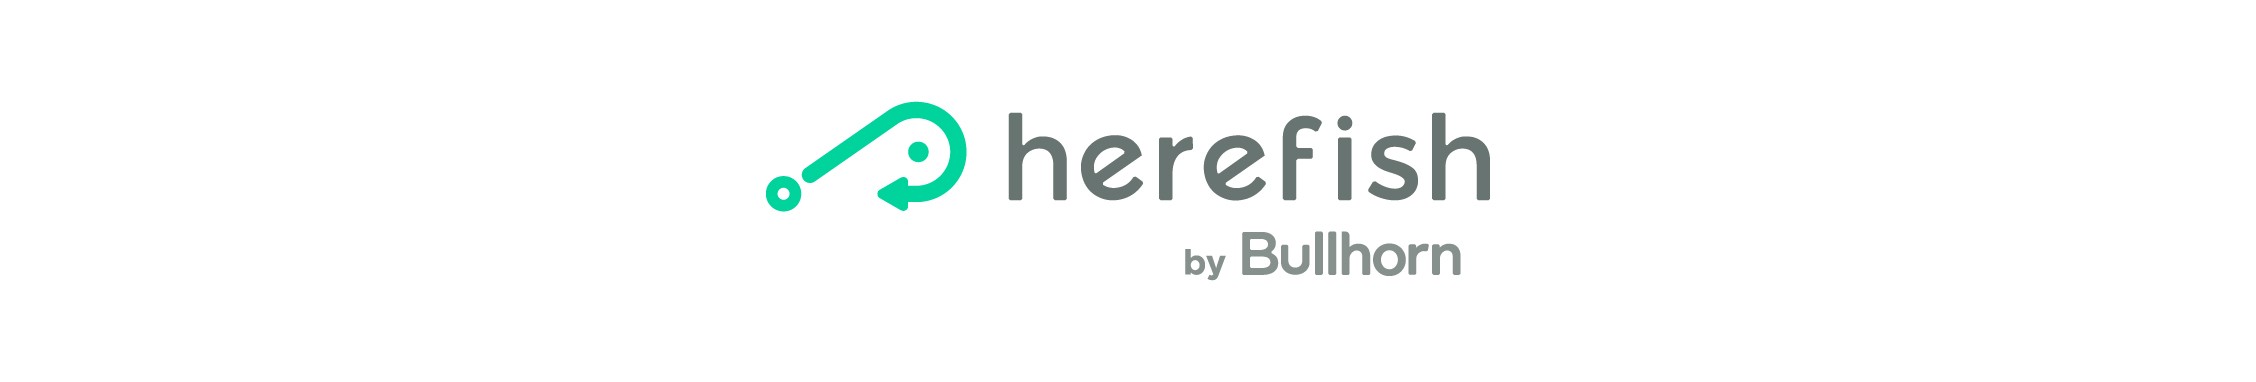 herefish by bullhorn and staffing referrals